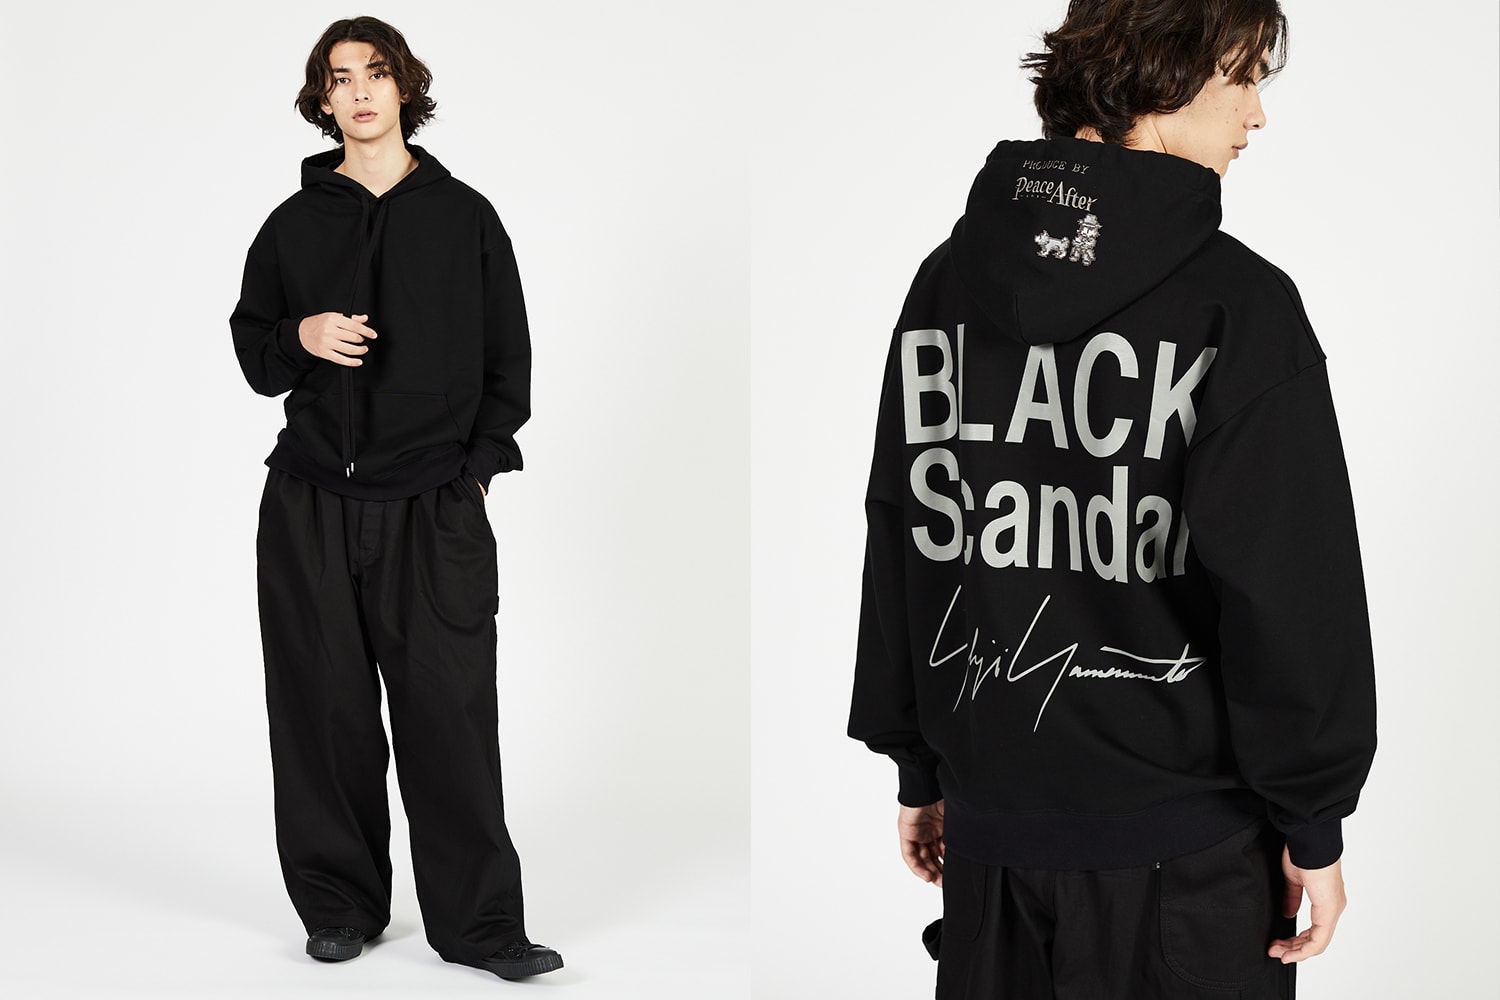 BLACK Scandal Yohji Yamamoto PEACE AND AFTER Capsule Release Hoodie Crewneck Sweater T Shirt Date Buy Price